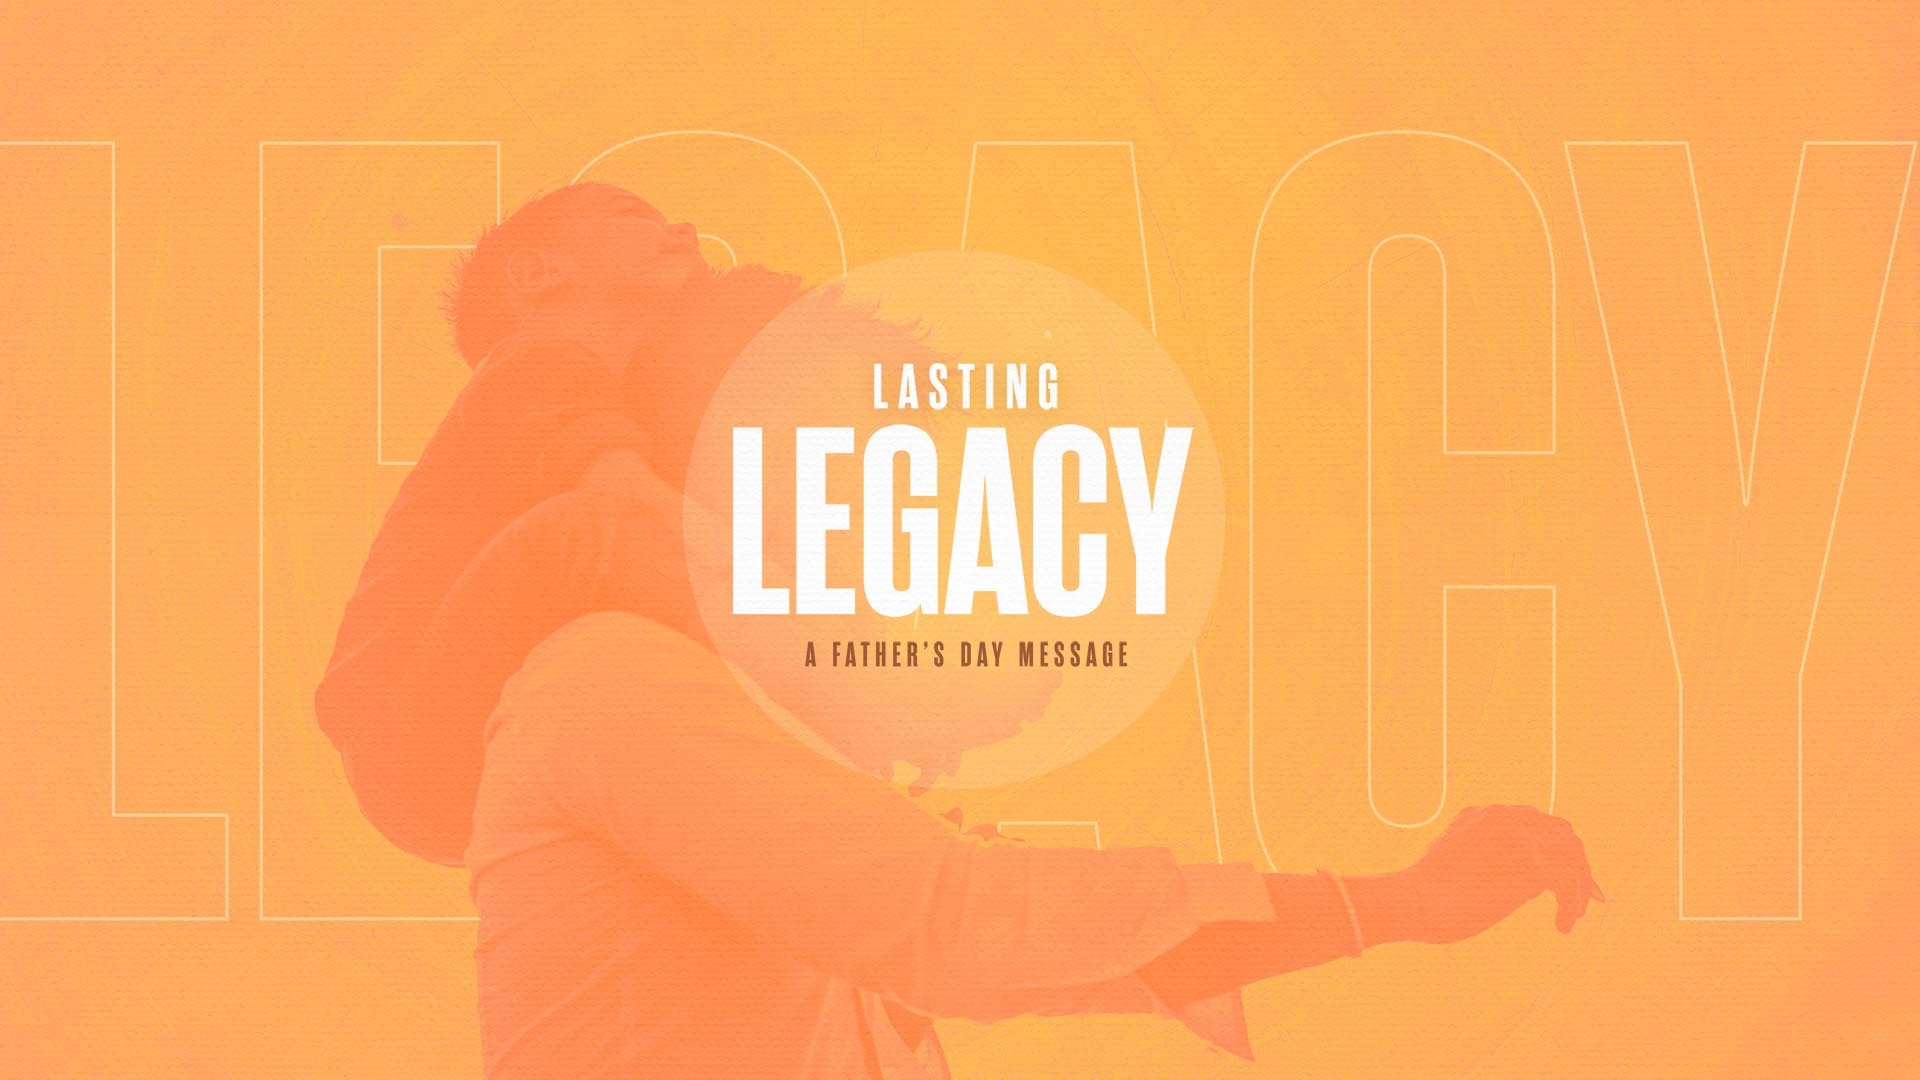 "Lasting Legacy: A Father's Day Message" Message